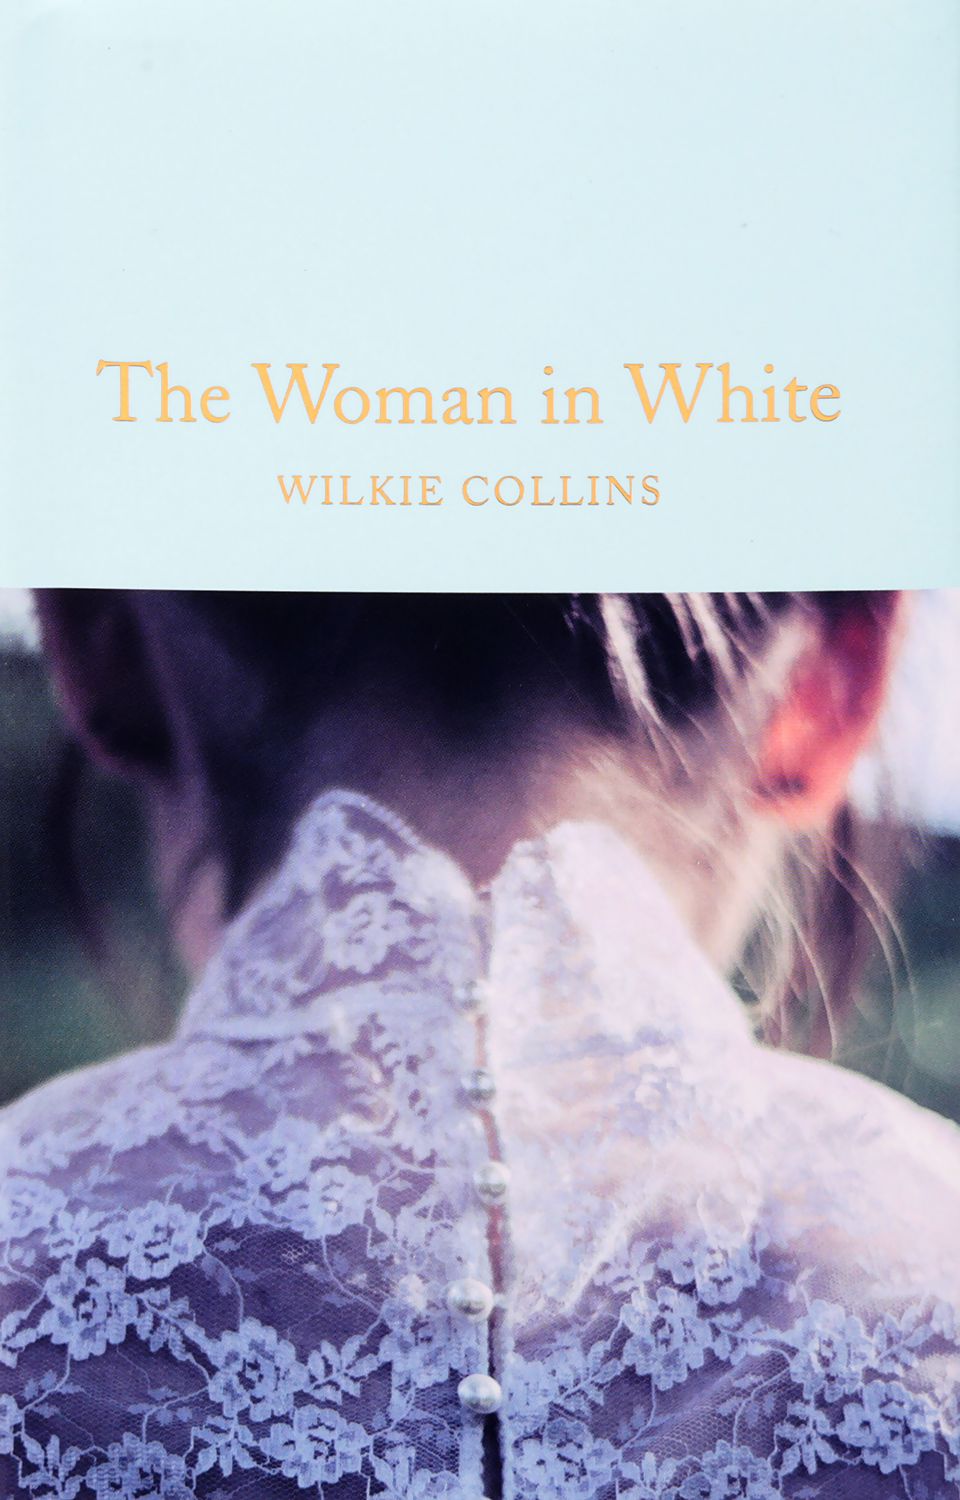 the woman in white wilkie collins summary